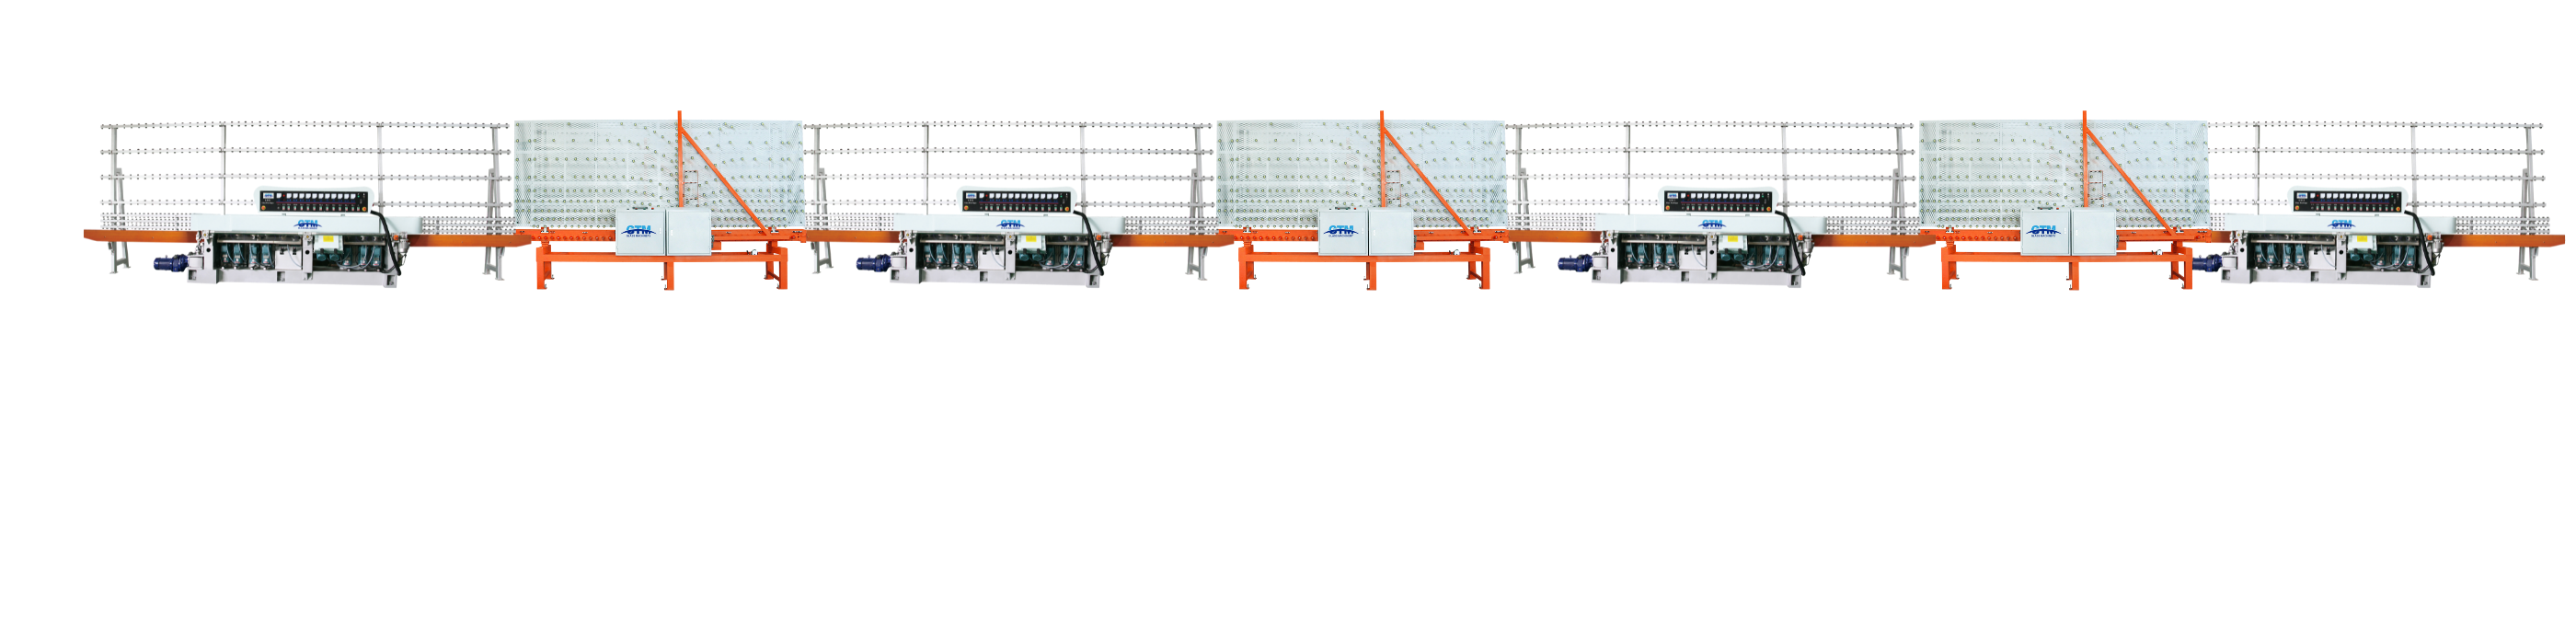 Automatic Glass straight edging production line